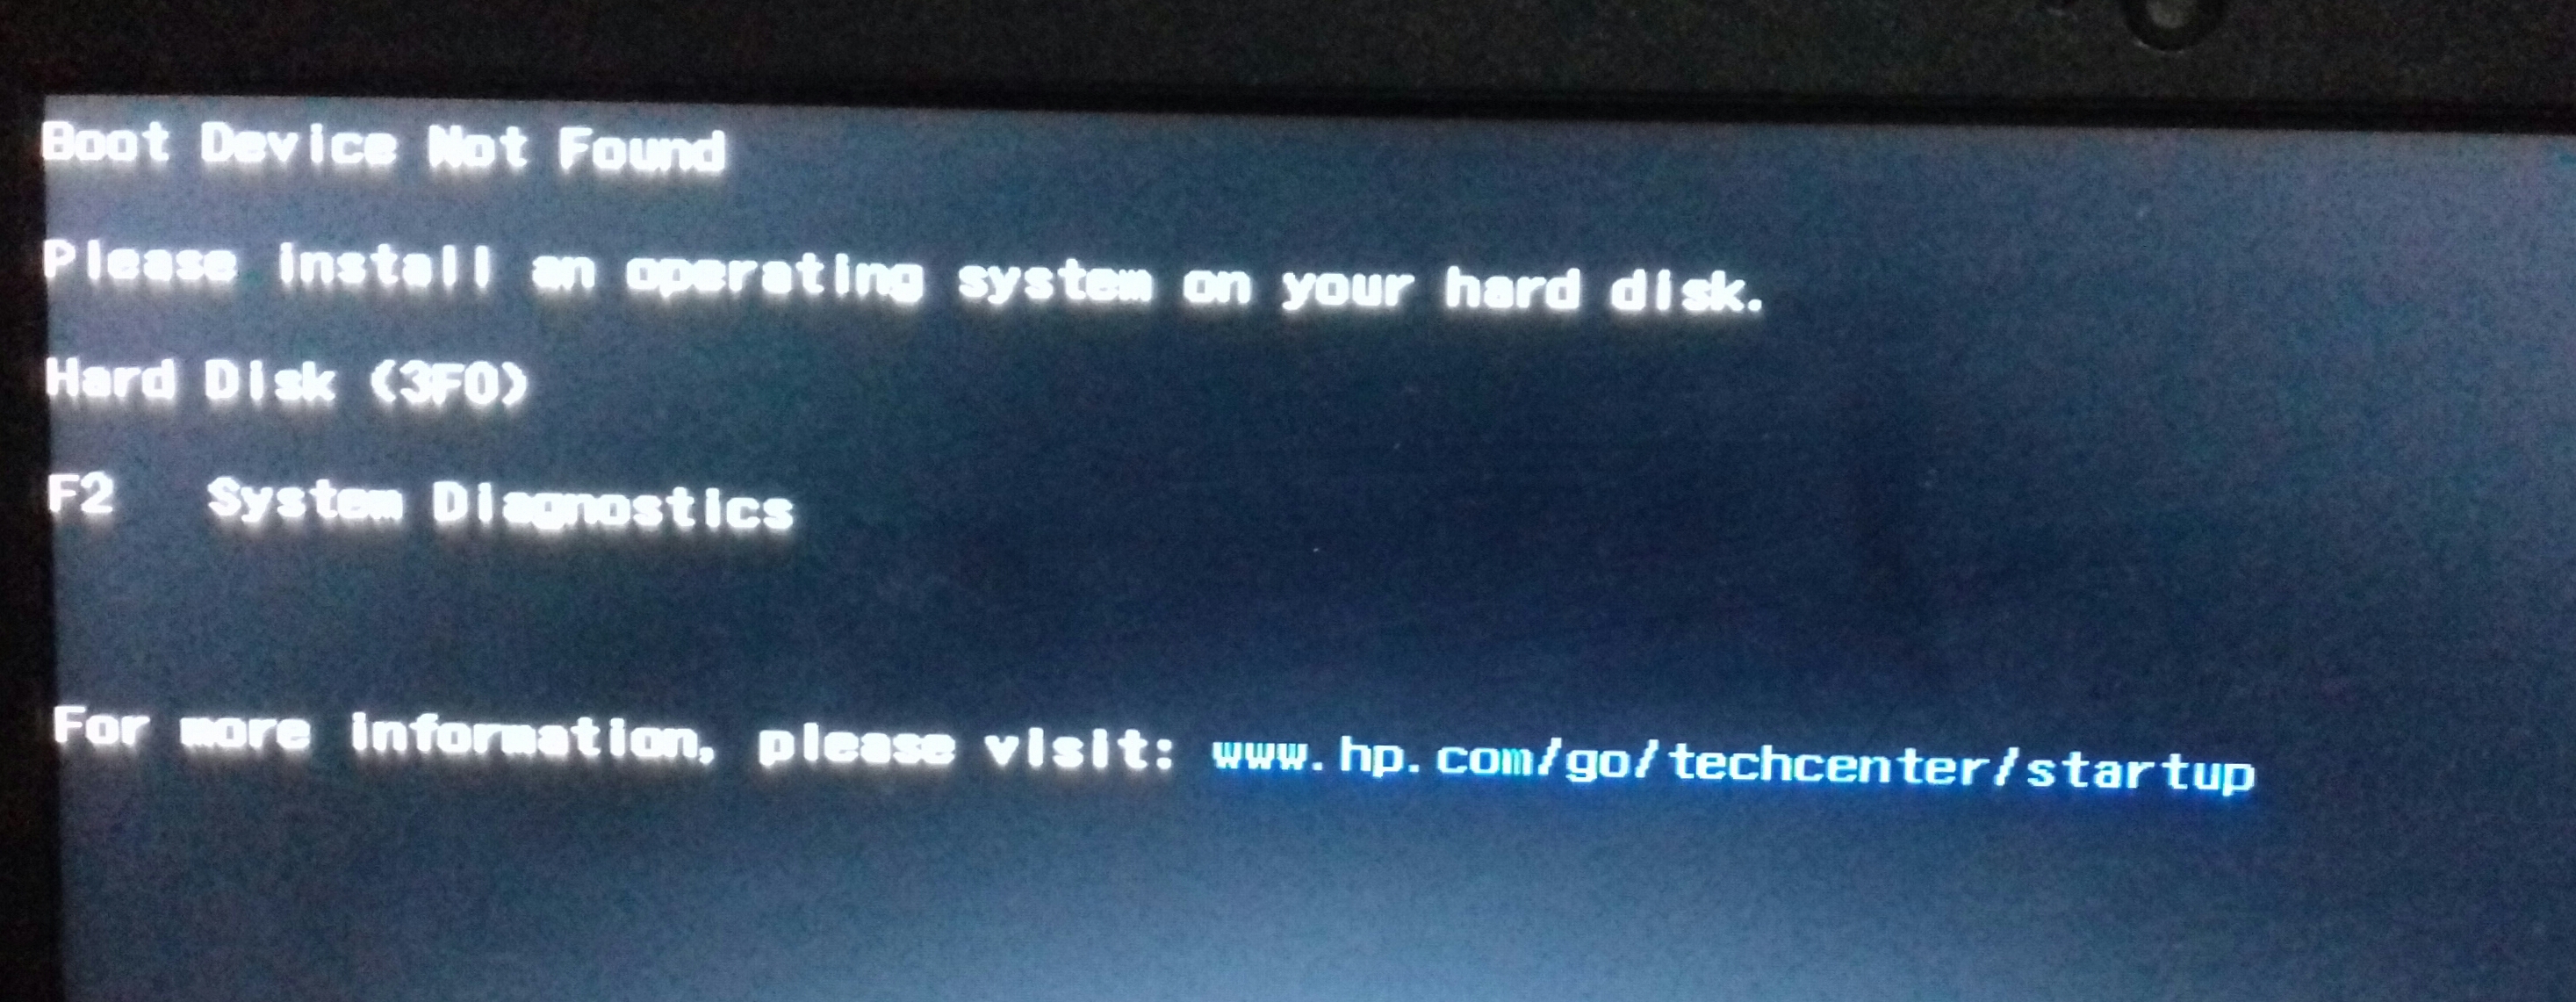 Showing "Boot device not found/ Hard disk(3F0)" - HP Support Community -  7040488